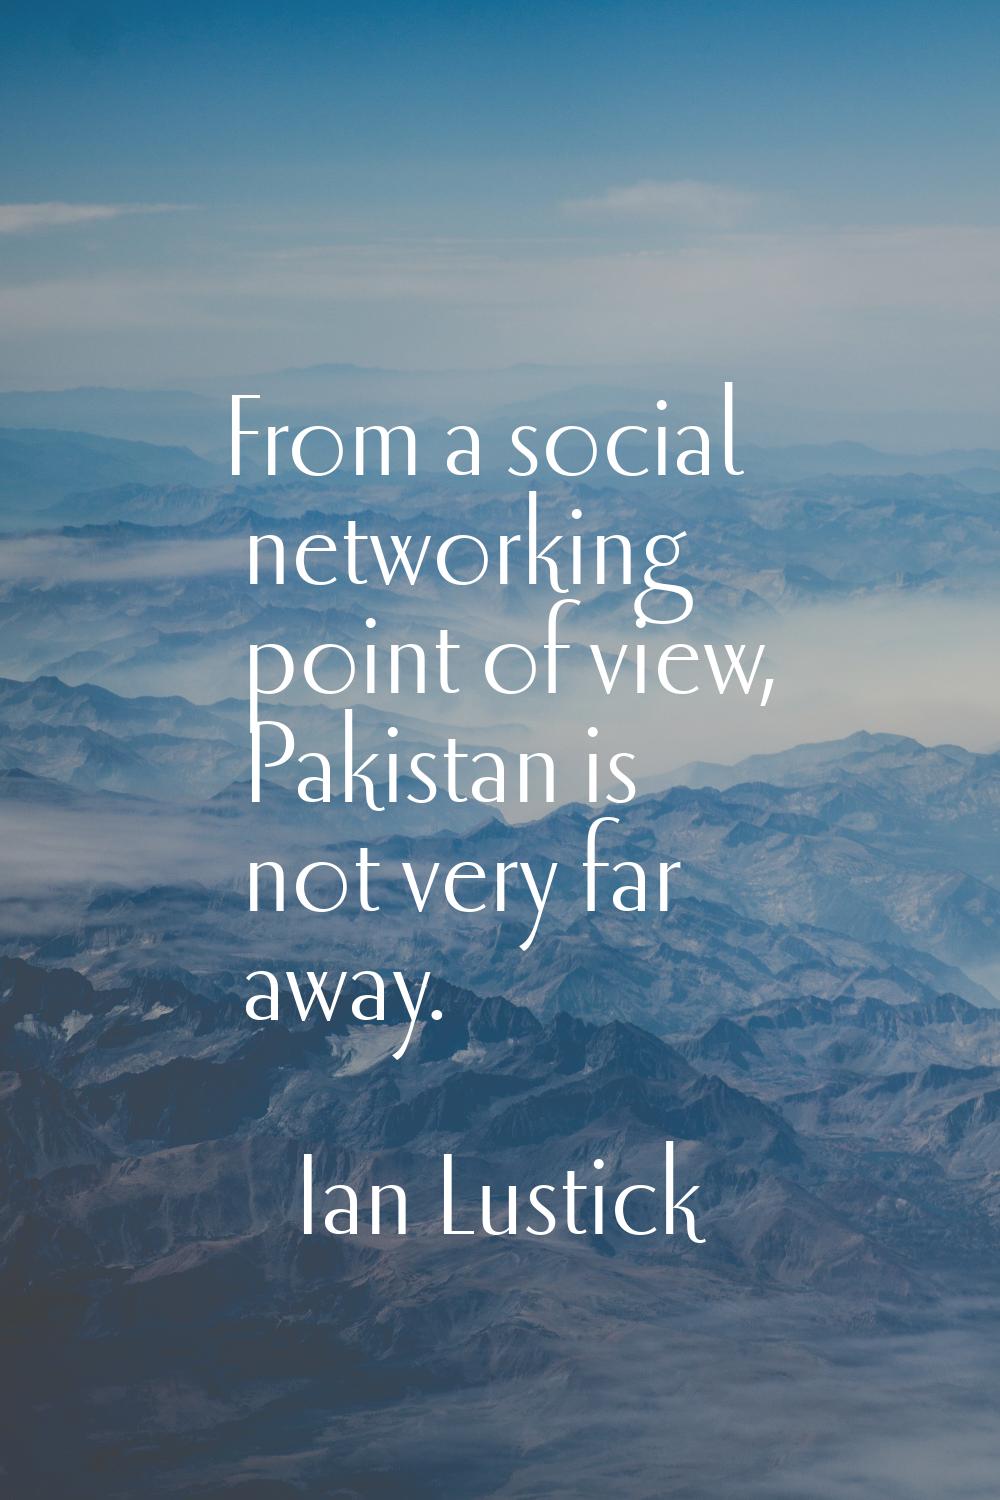 From a social networking point of view, Pakistan is not very far away.